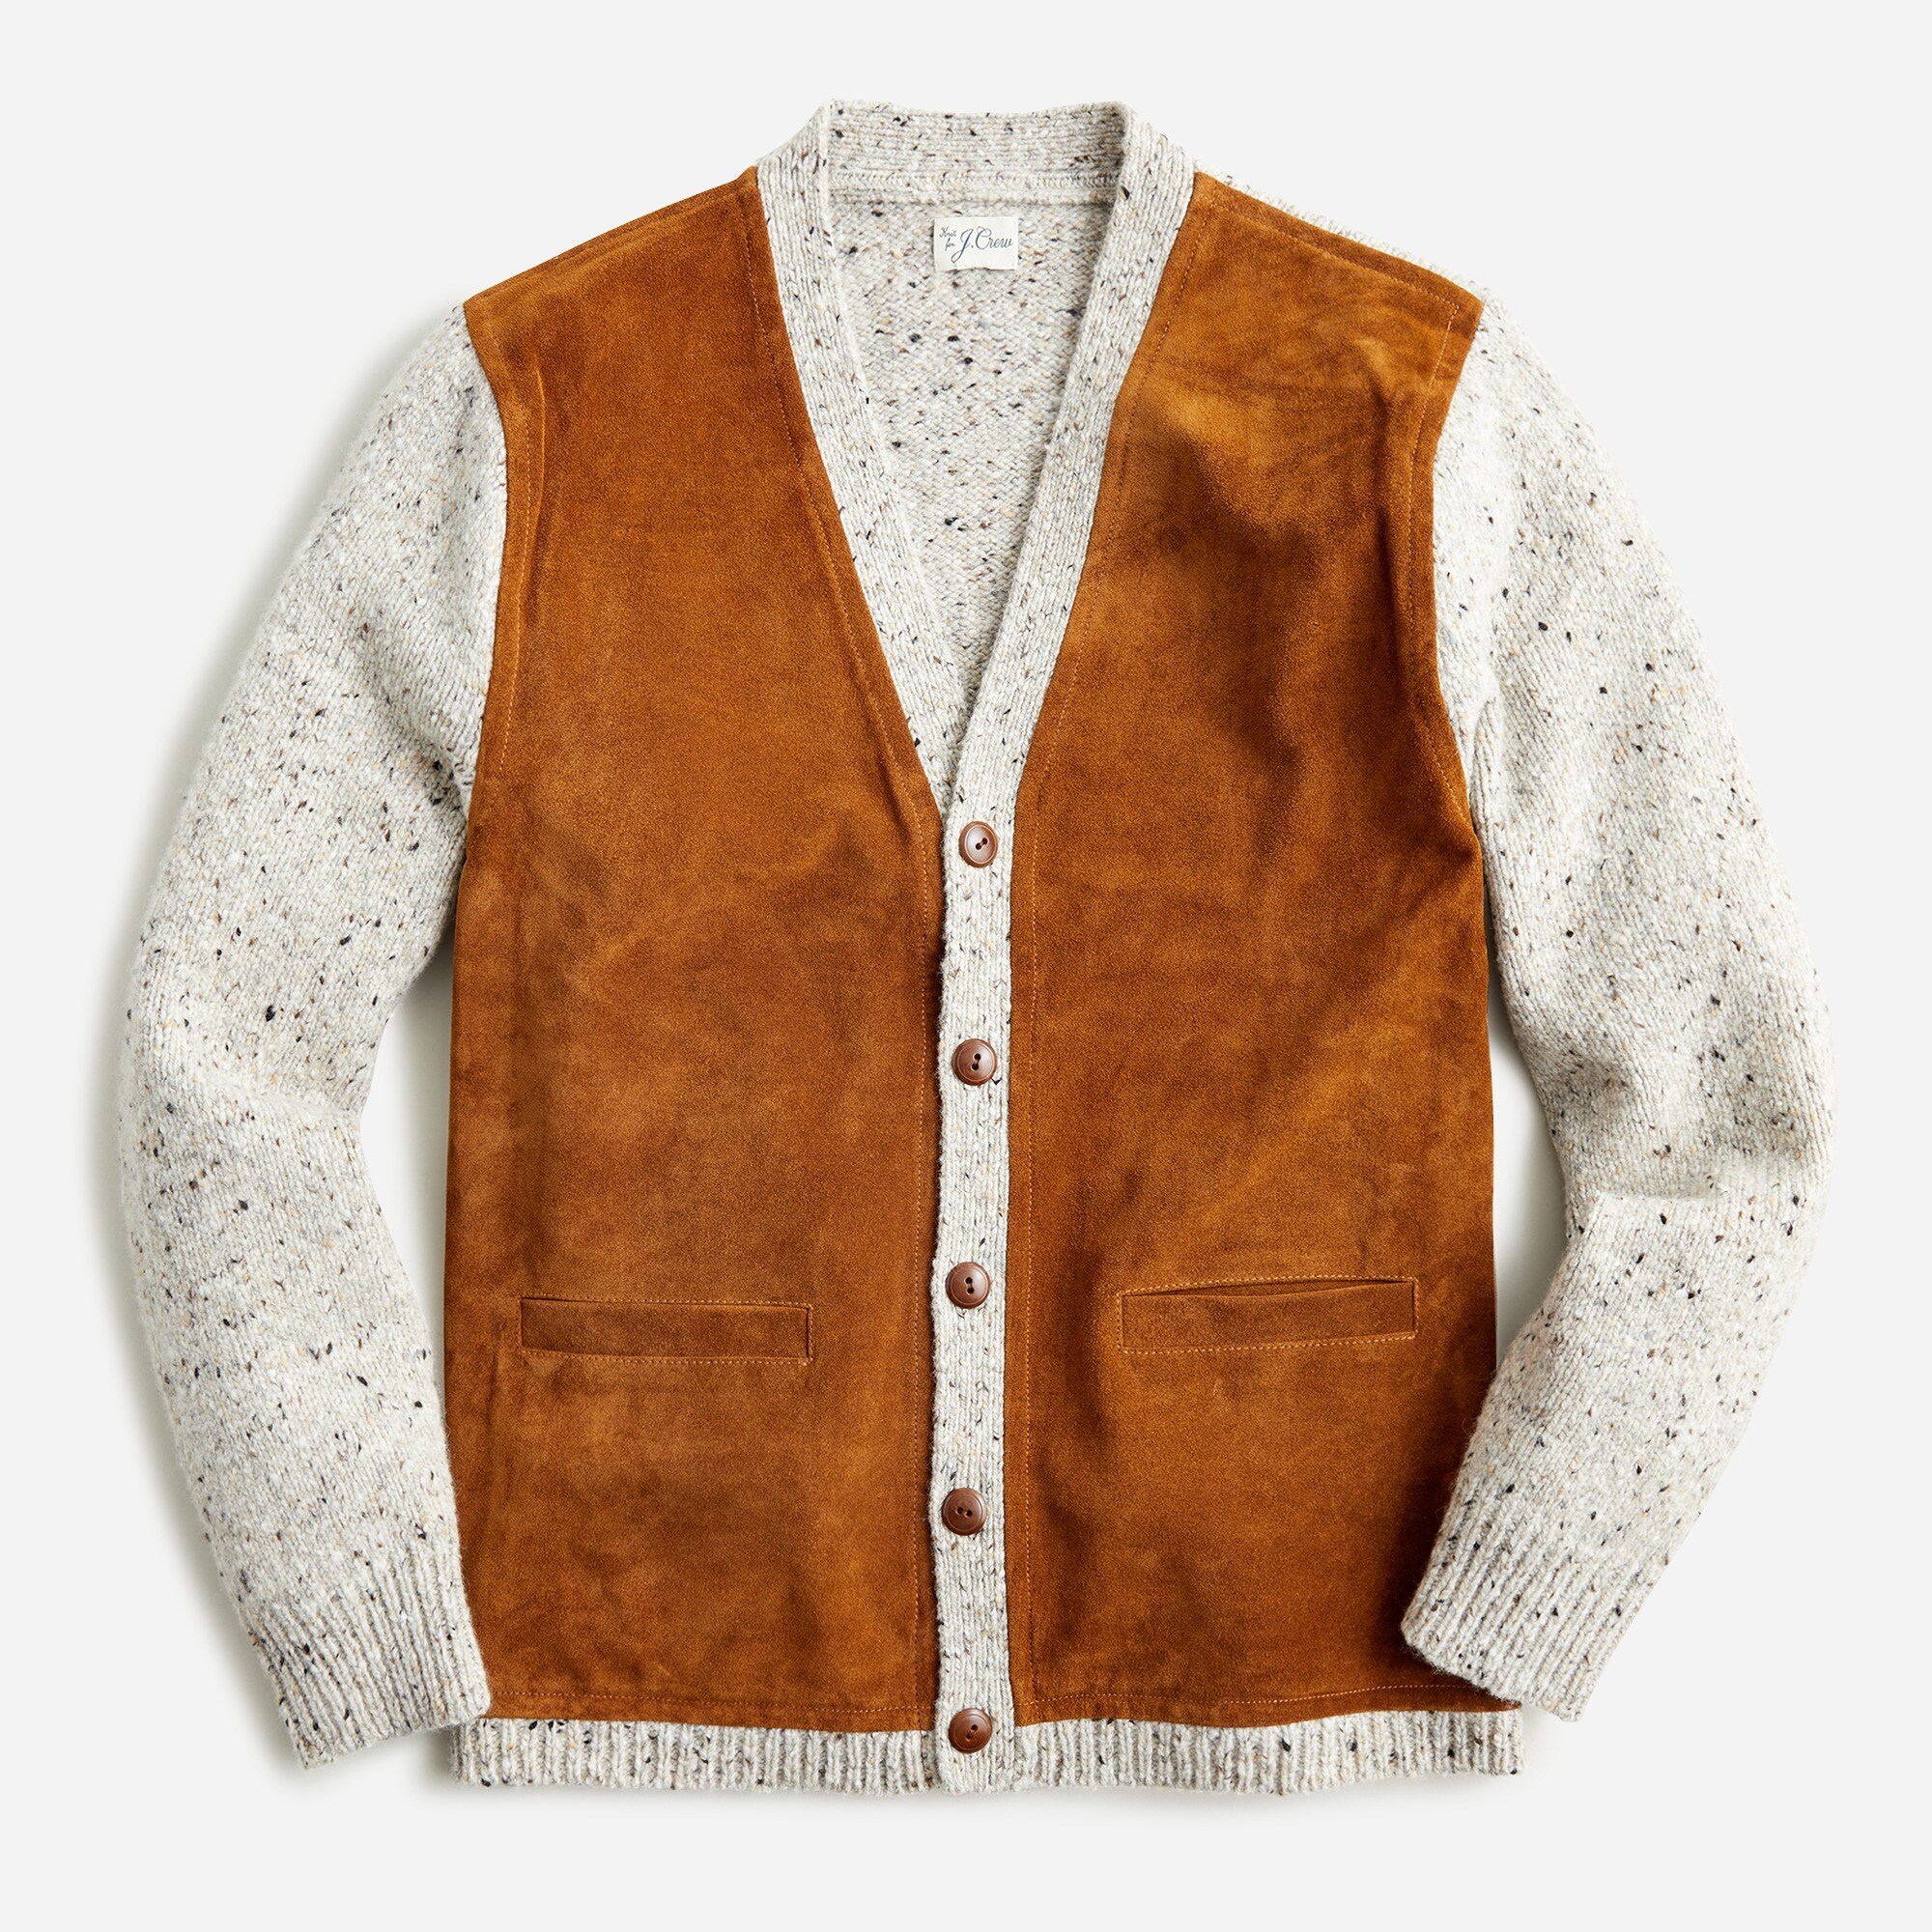 J.Crew: Irish Donegal Wool V-neck Cardigan With Italian Suede For Men